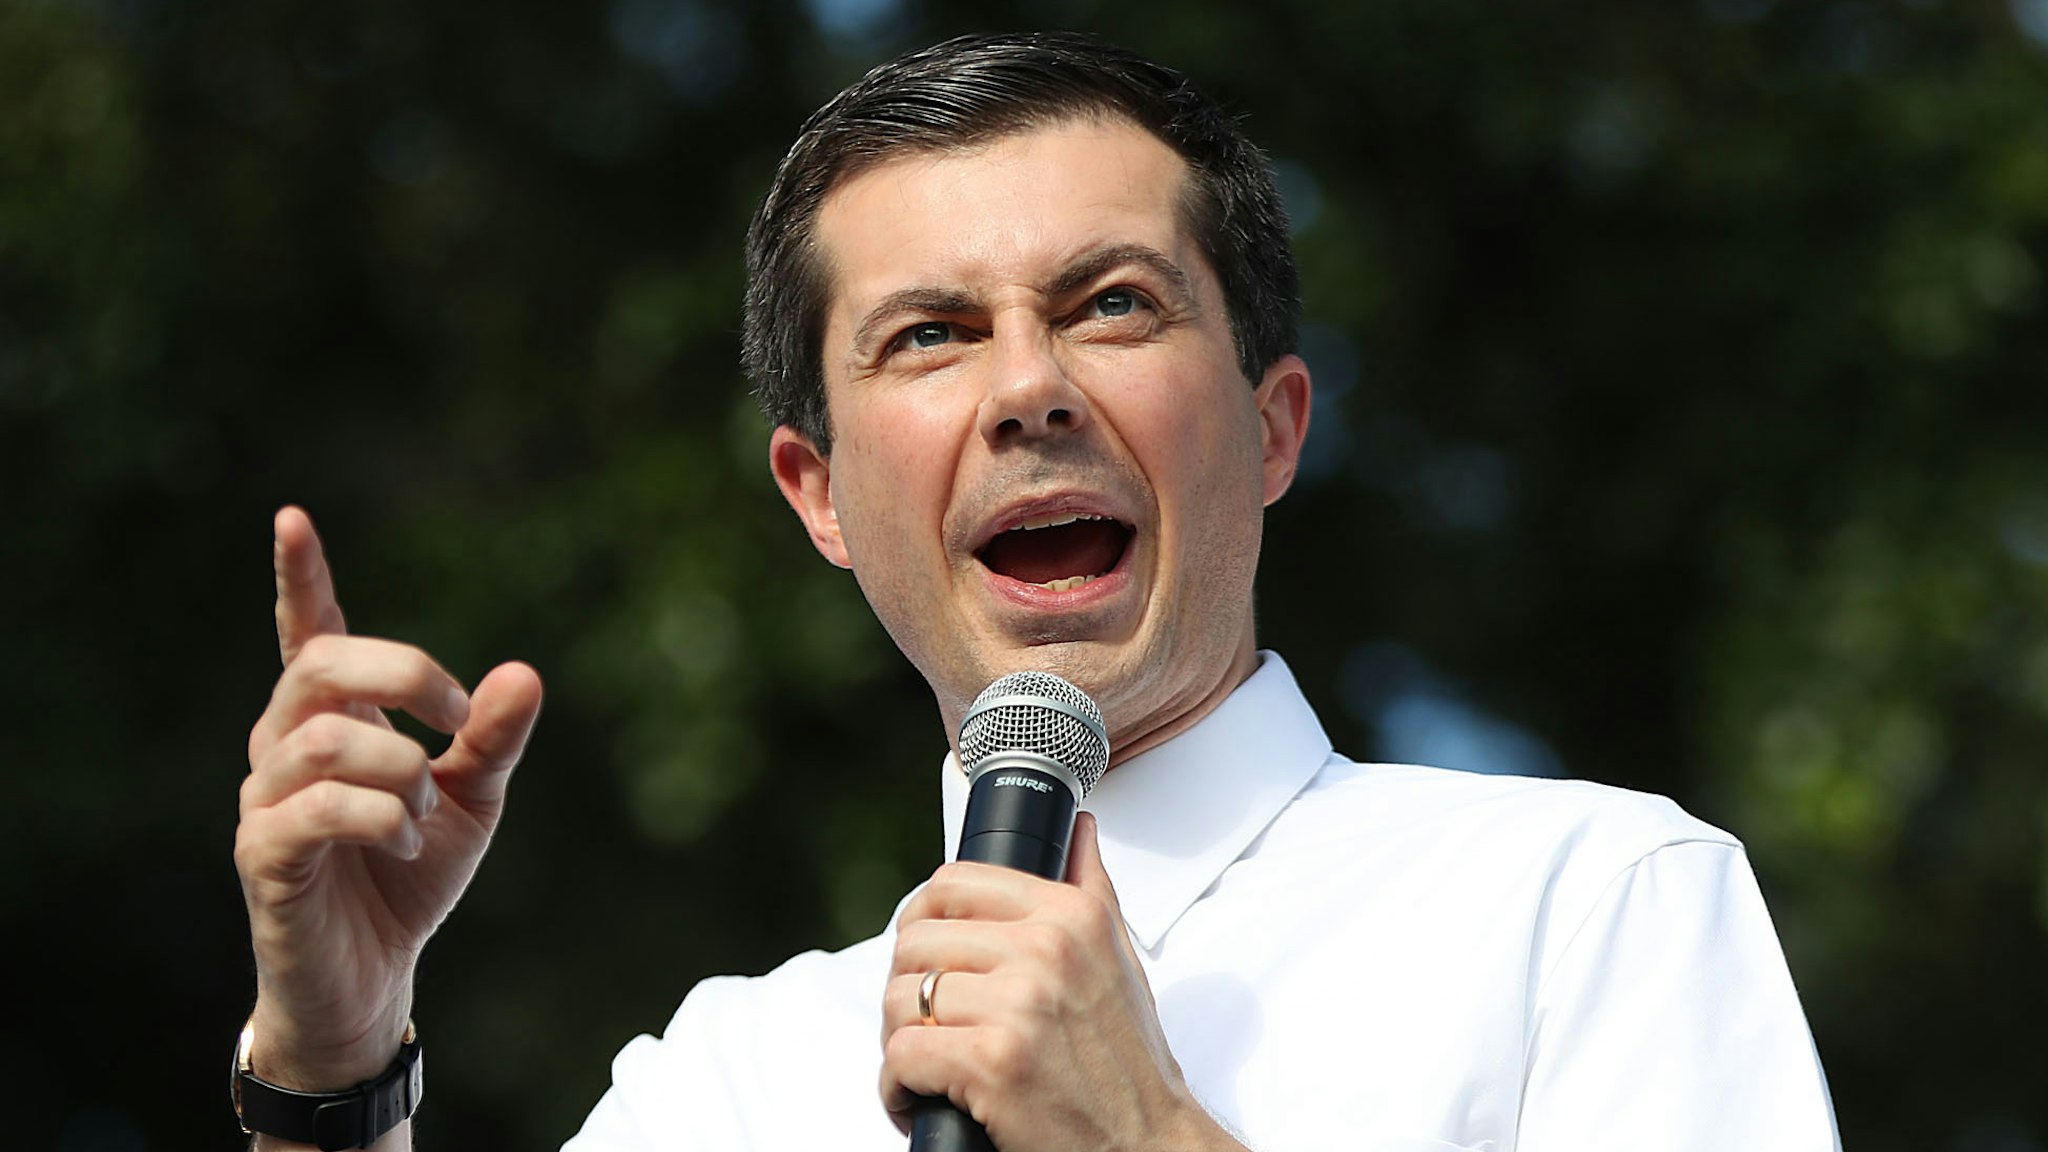 MIAMI, FLORIDA - MAY 20: Democratic presidential candidate and South Bend, Indiana Mayor Pete Buttigieg speaks during a grassroots fundraiser at the Wynwood Walls on May 20, 2019 in Miami, Florida. Buttigieg is one of more than 20 candidates seeking the Democratic nomination for president.